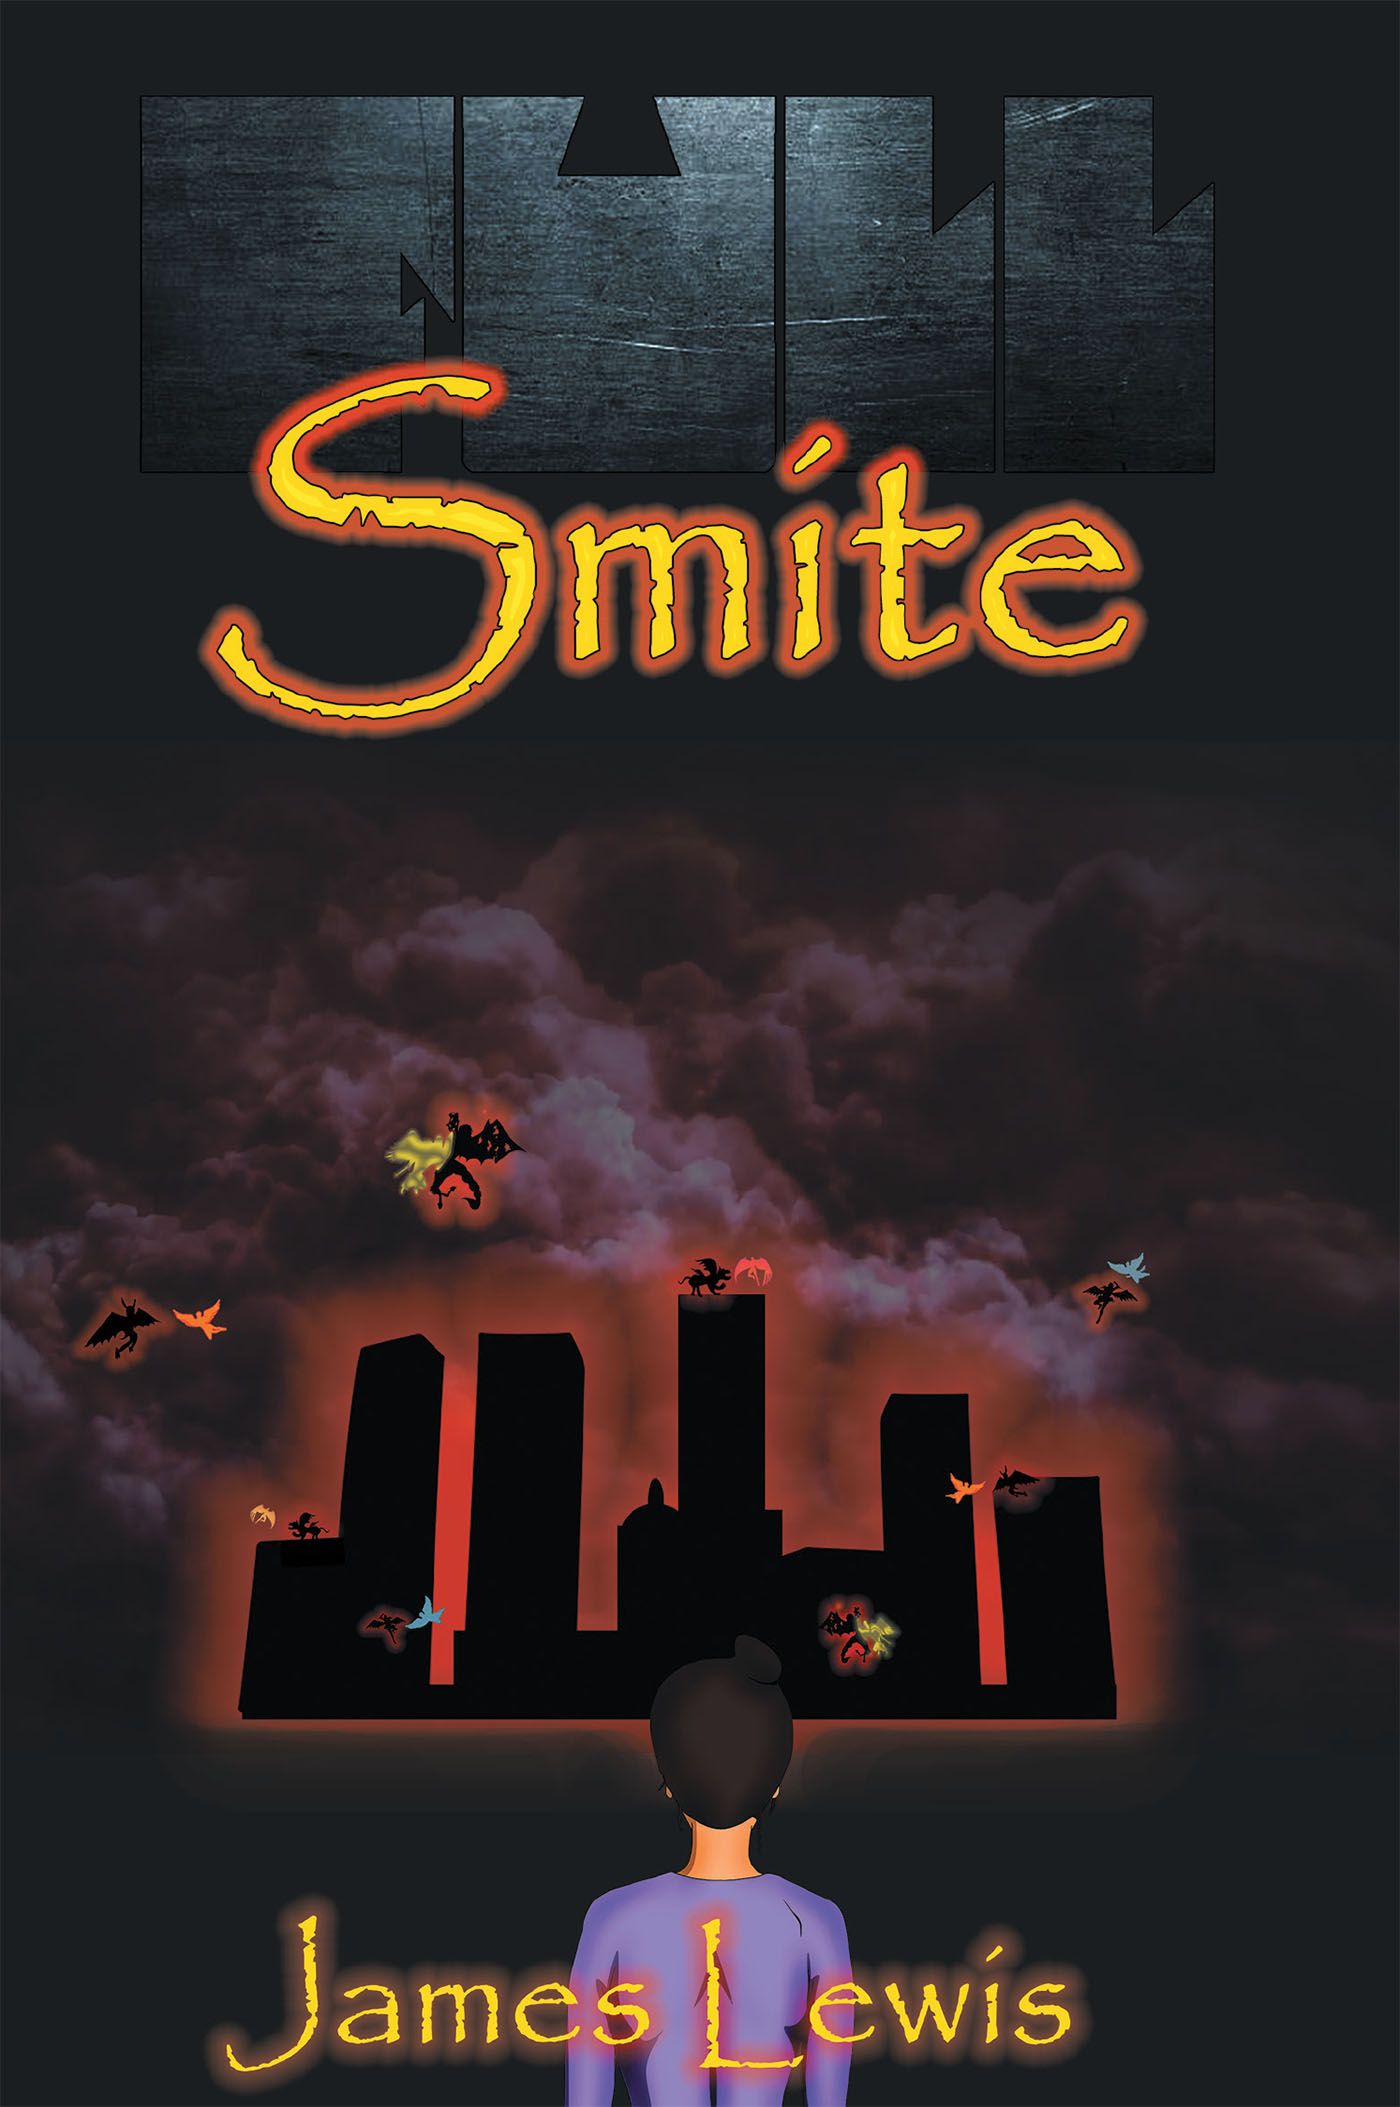 James Lewis’s Newly Released "Full Smite" is an Action-Packed Tale of Good Versus Evil That Finds a Host of Heavenly Beings on a Path of Righteousness